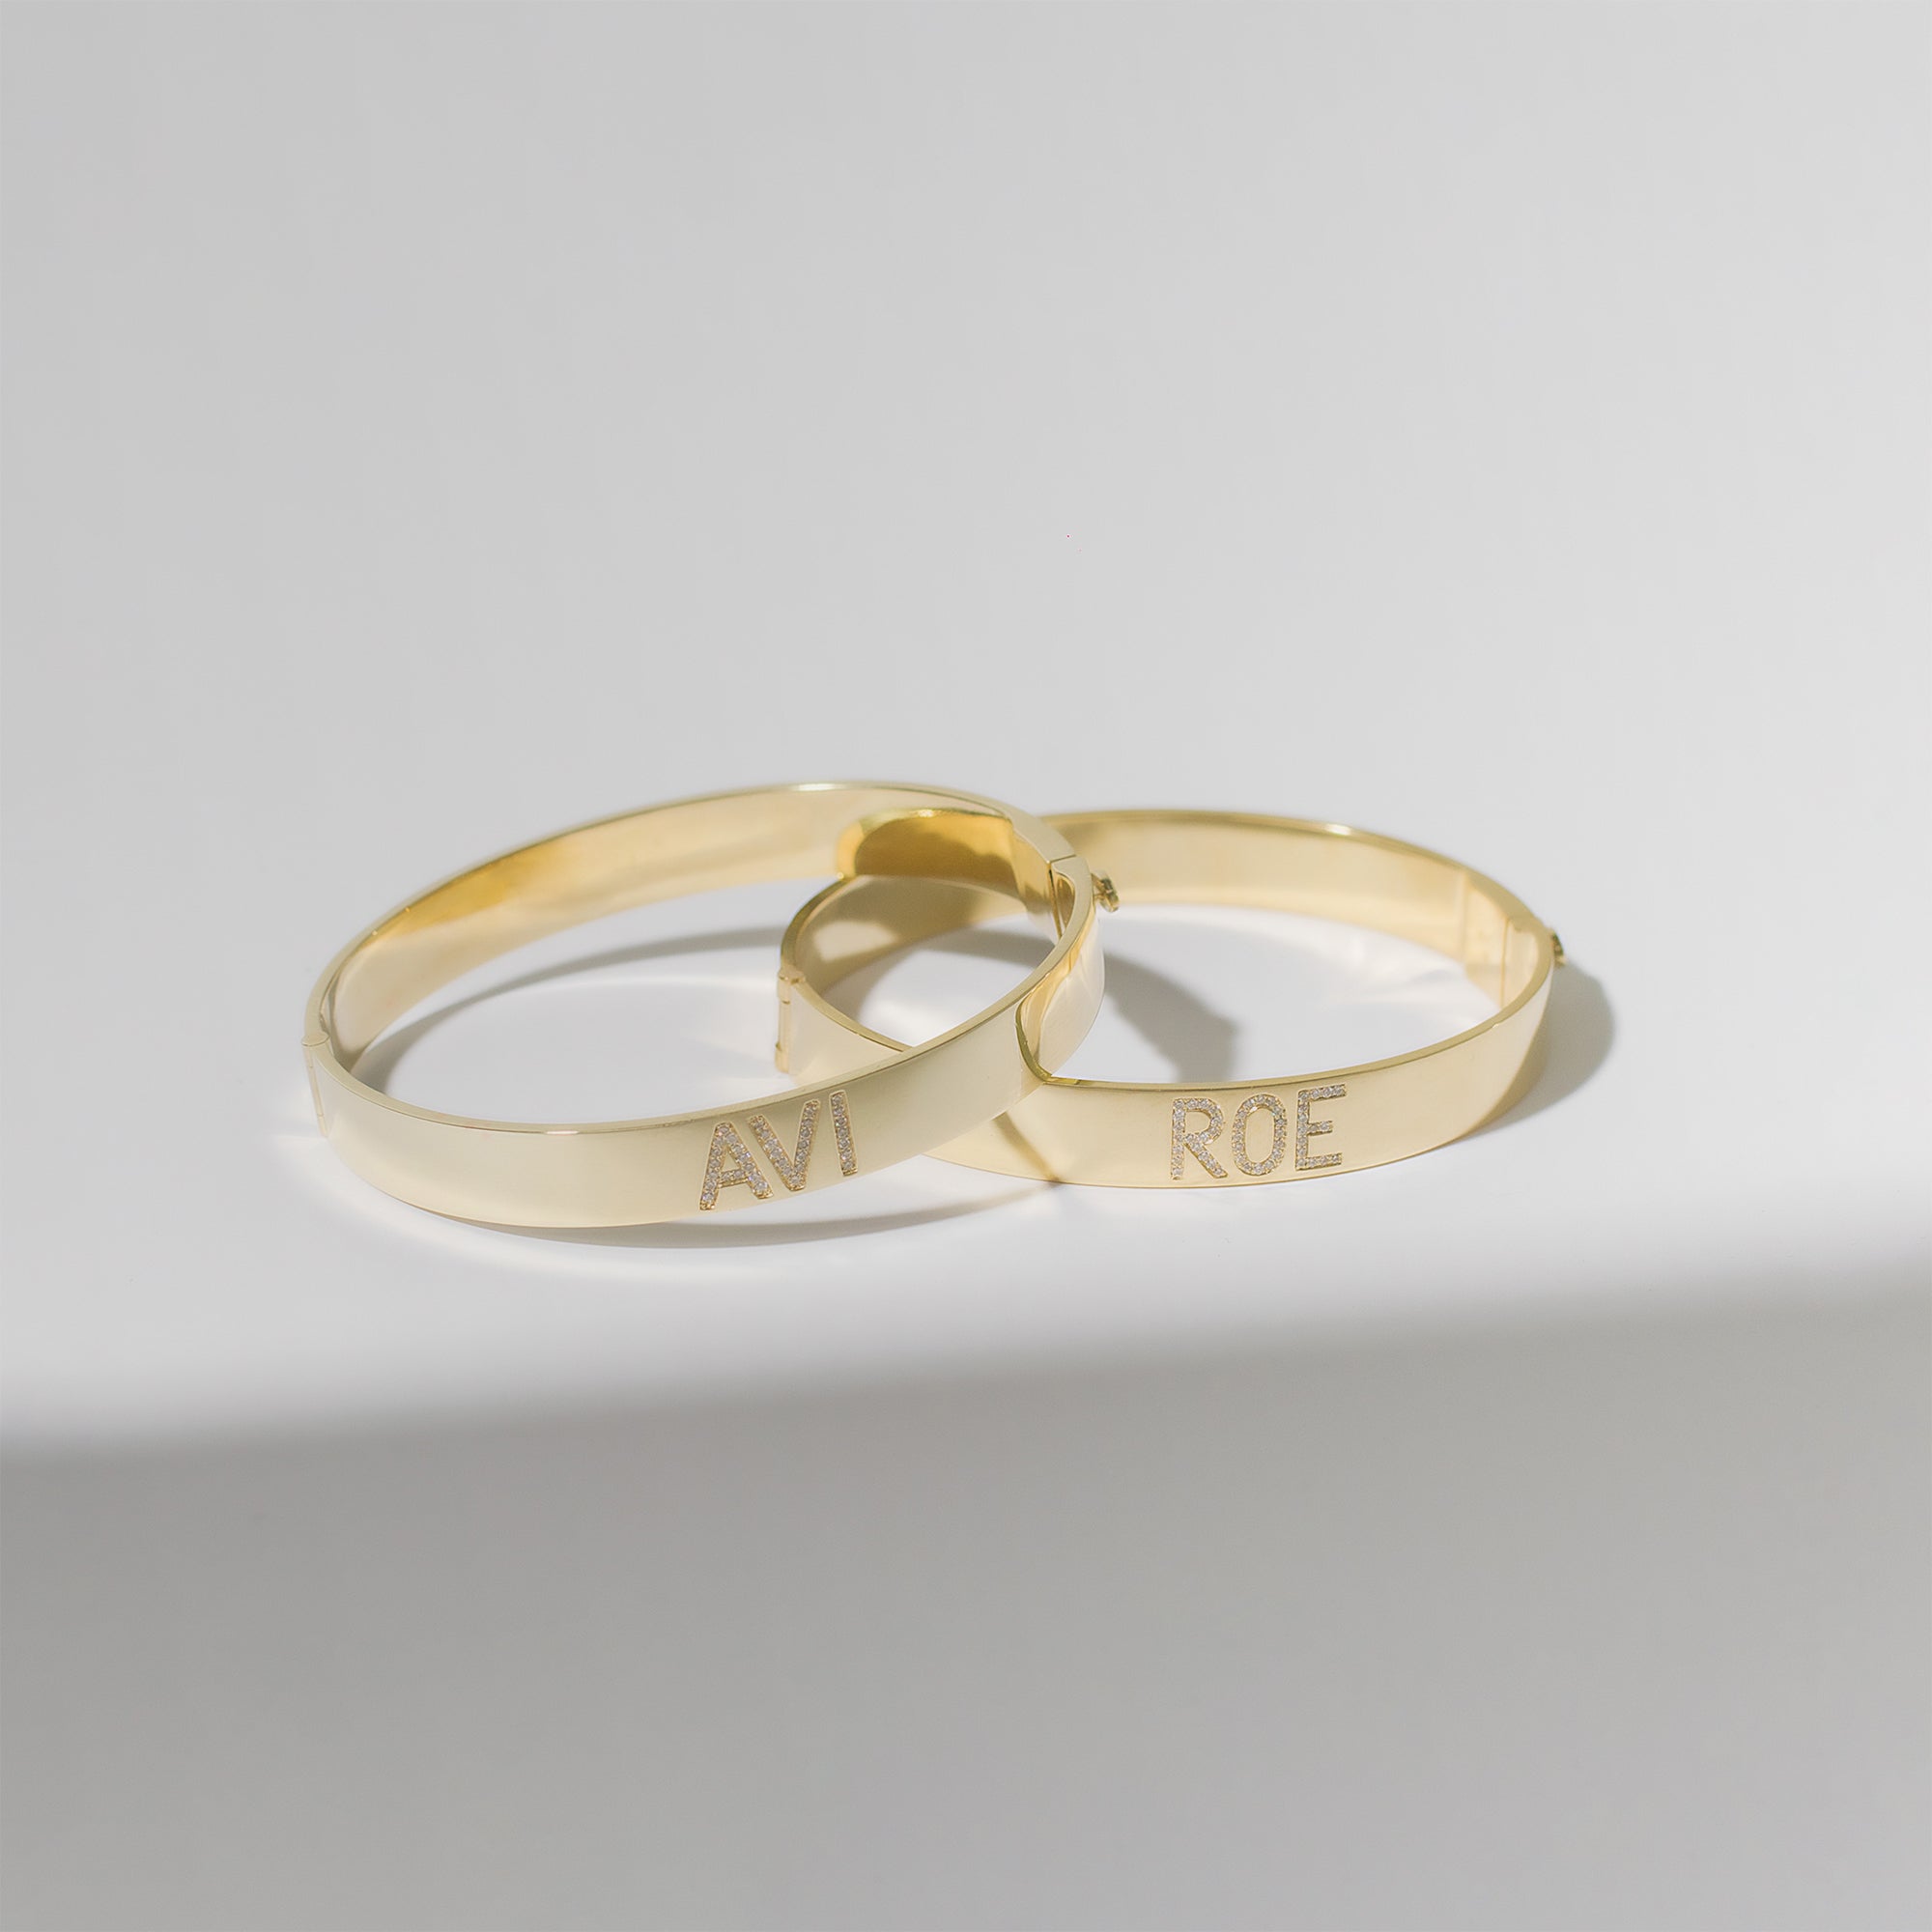 Two of ILA SODHANI's Celebration Bangles in yellow gold with diamonds set into the names "Avi" and "Roe"; the bangles are leaning on each other in front of a white background.